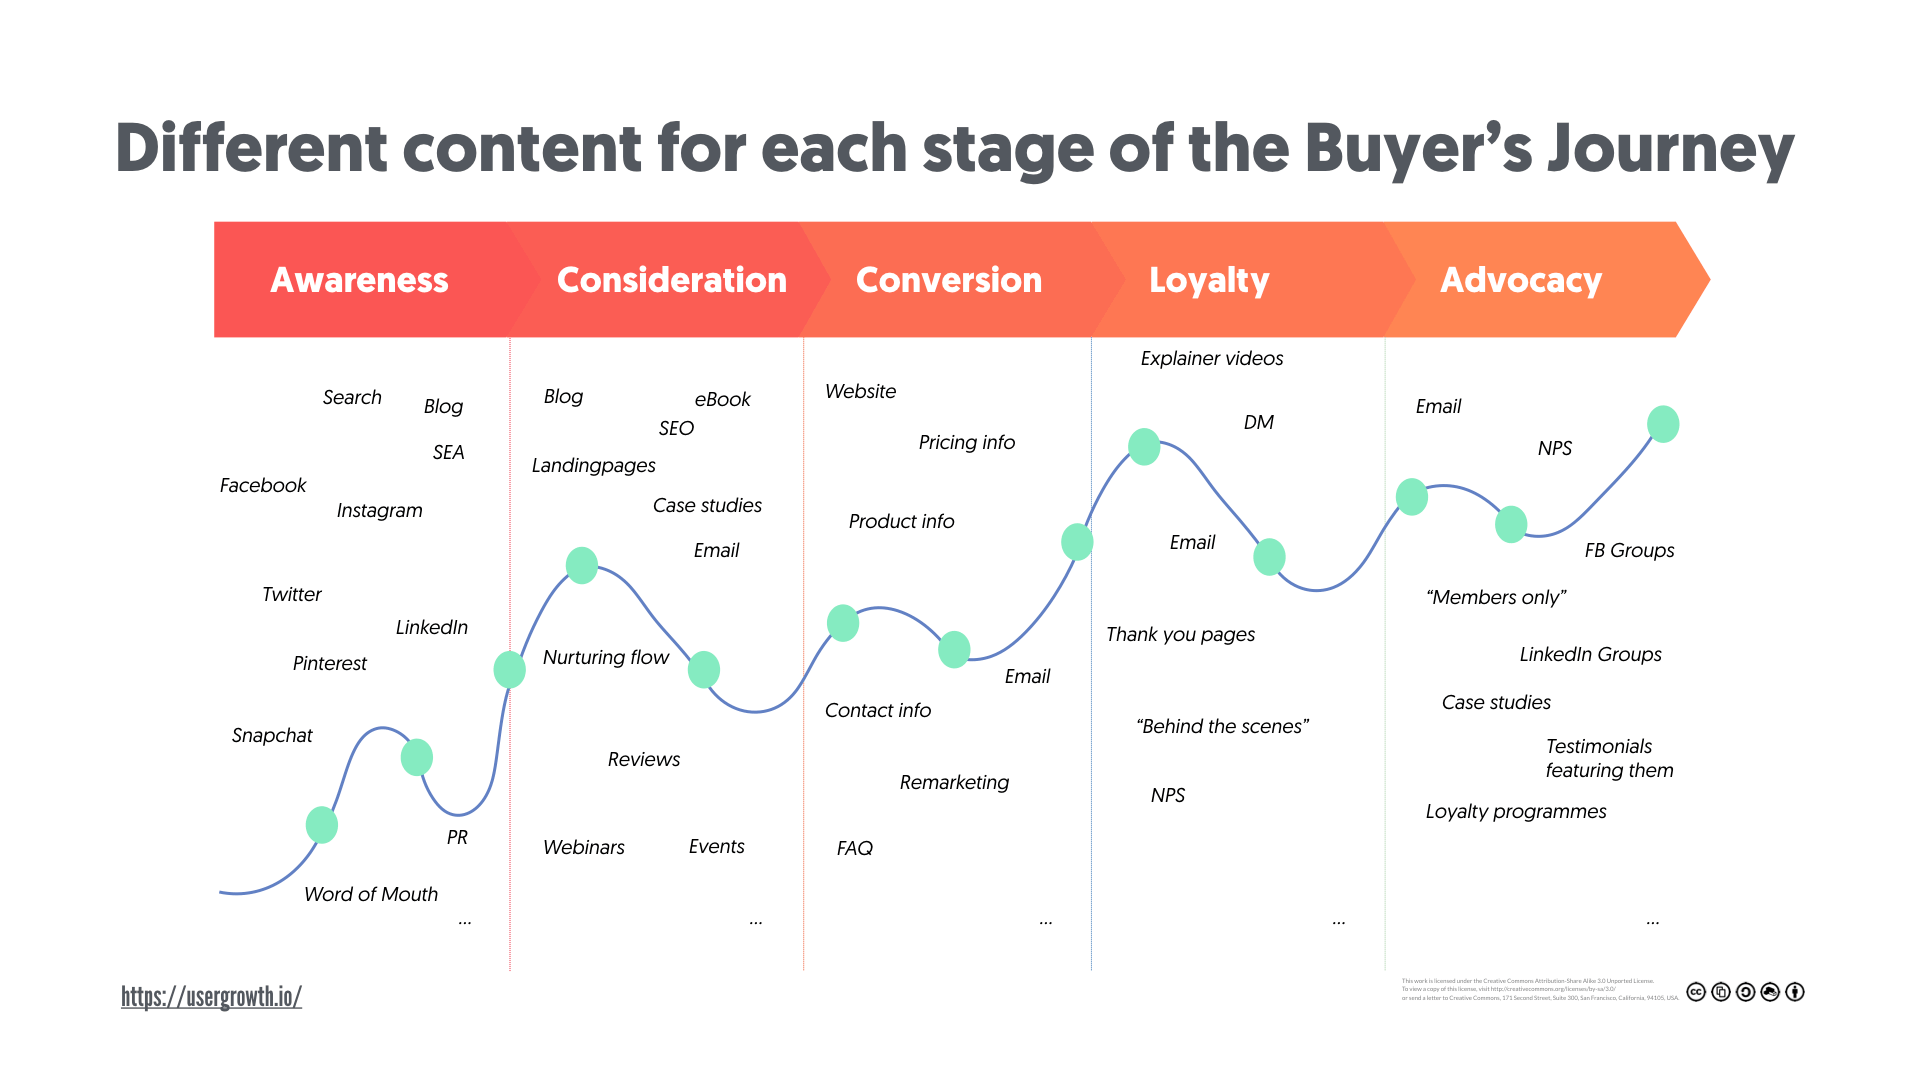 Different content for each stage of the buyer’s journey